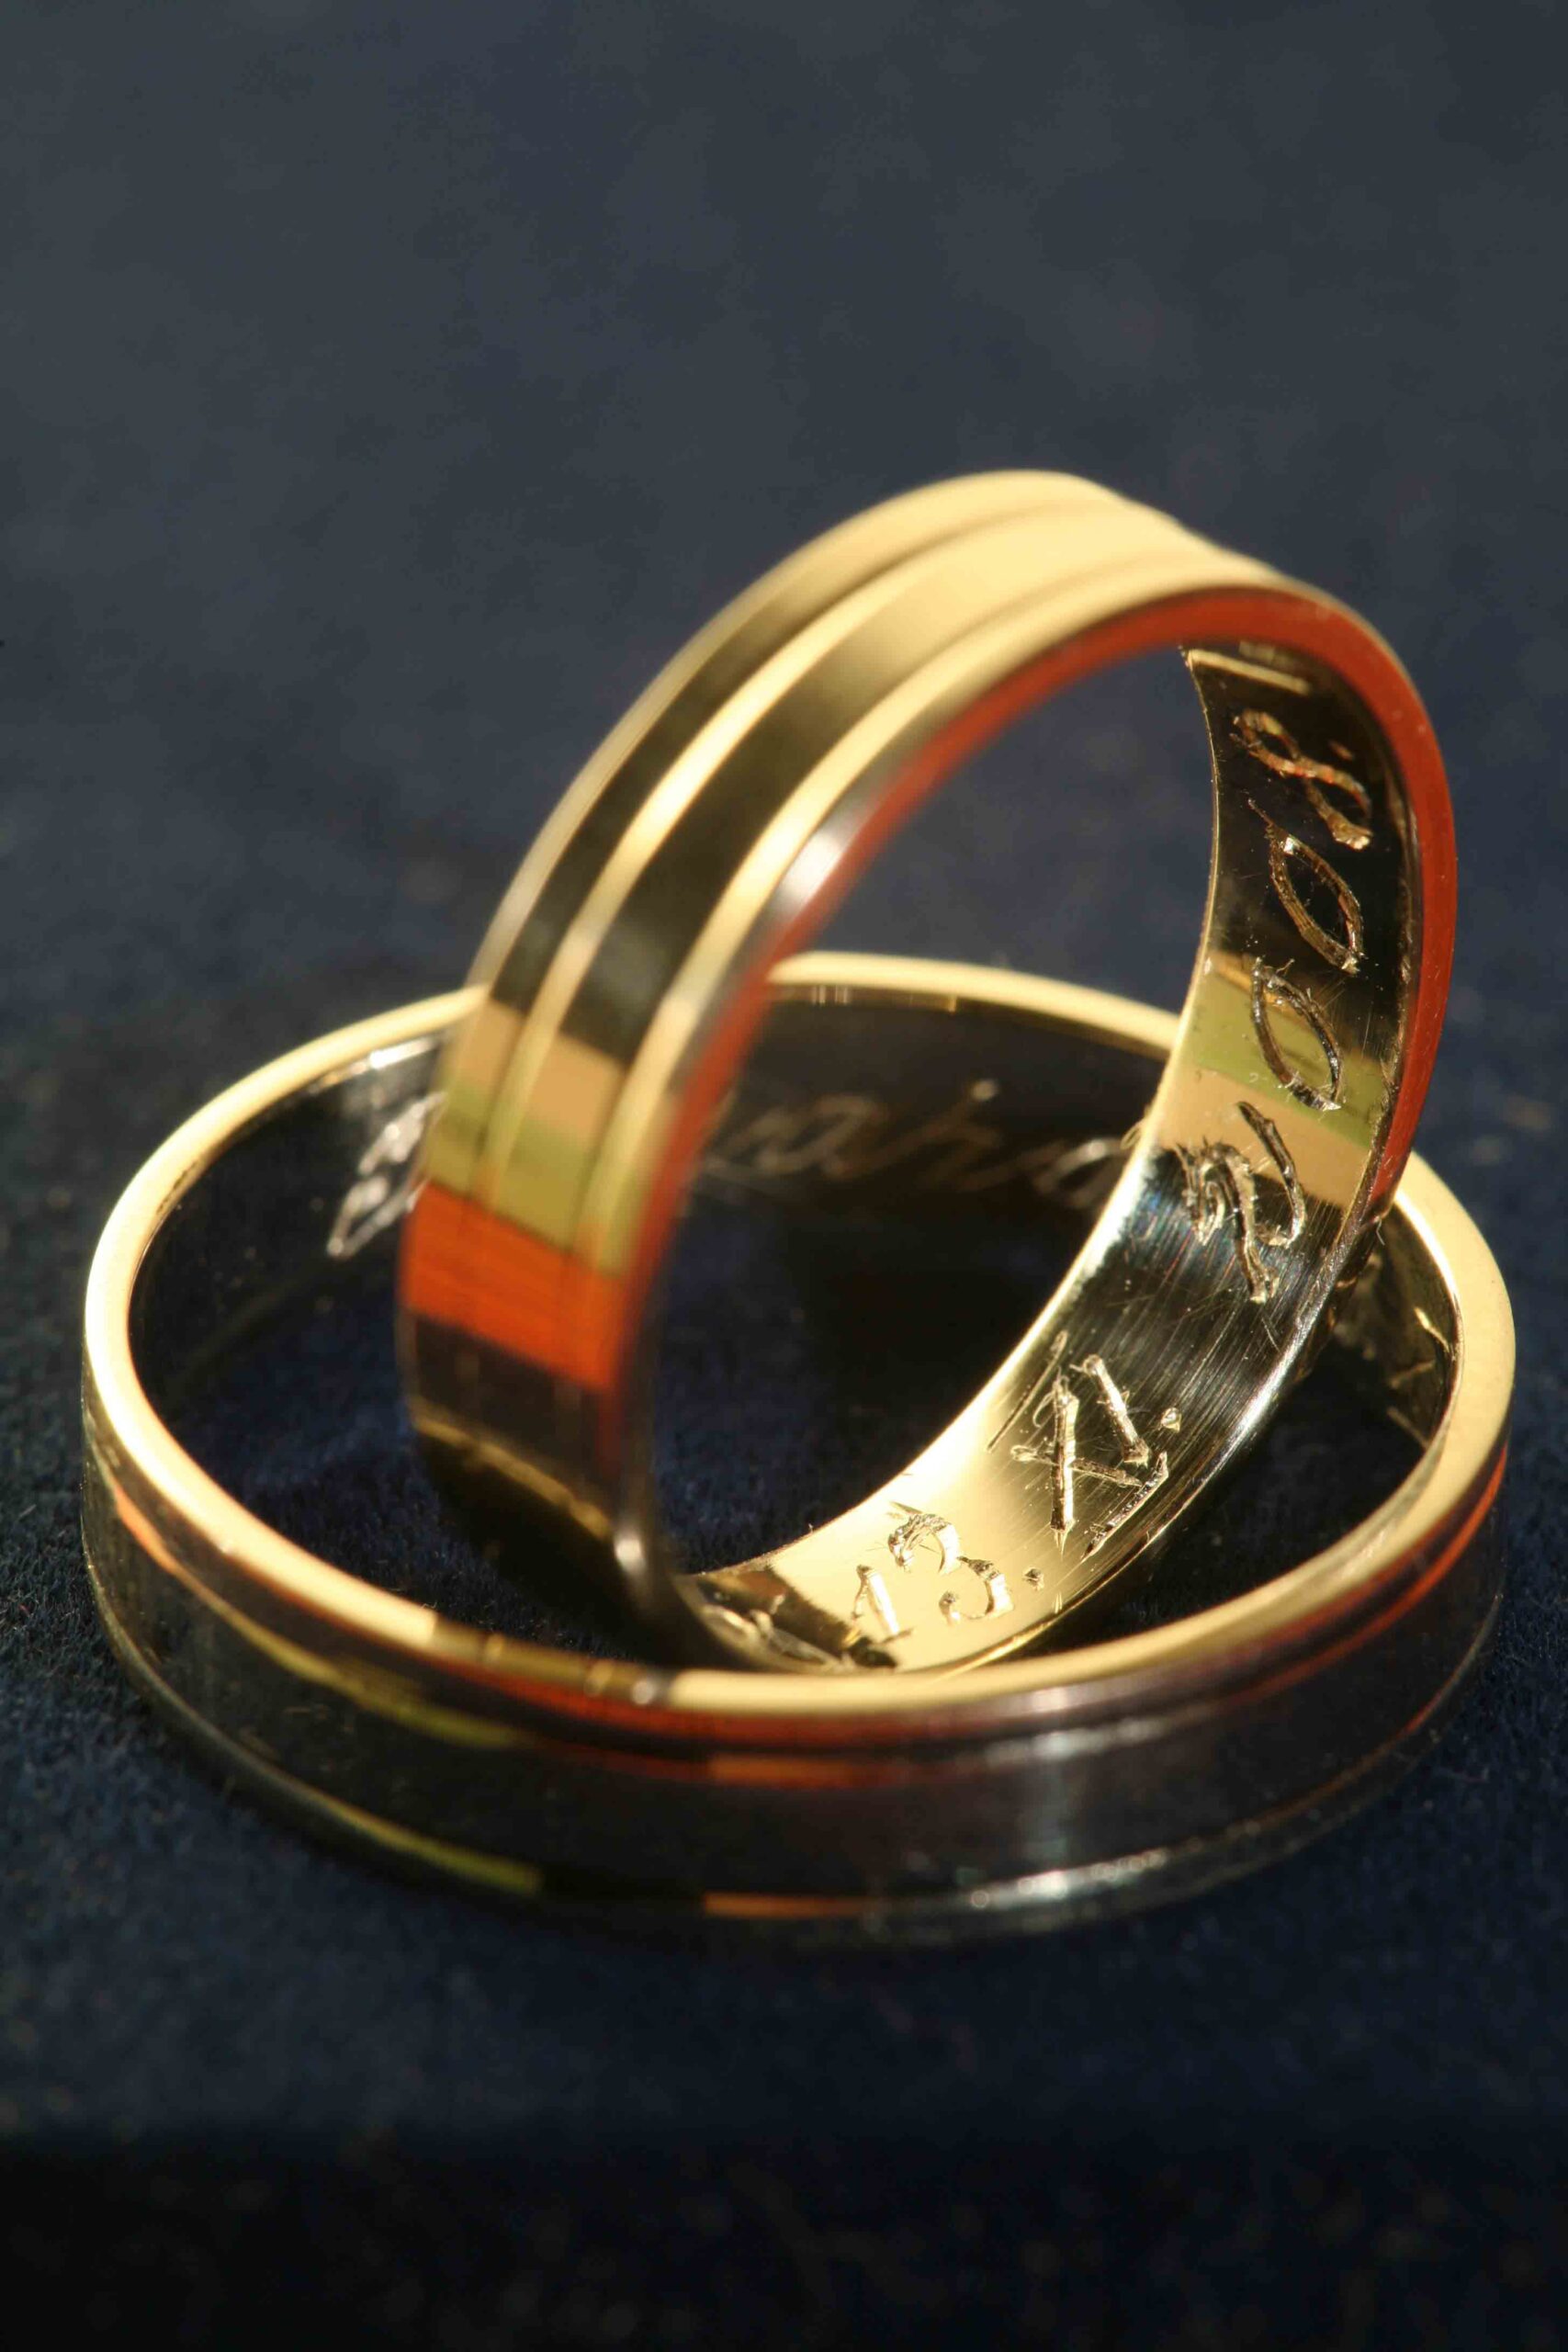 Two yellow gold engraved rings with one ring nestled inside the other, both resting on a black surface.